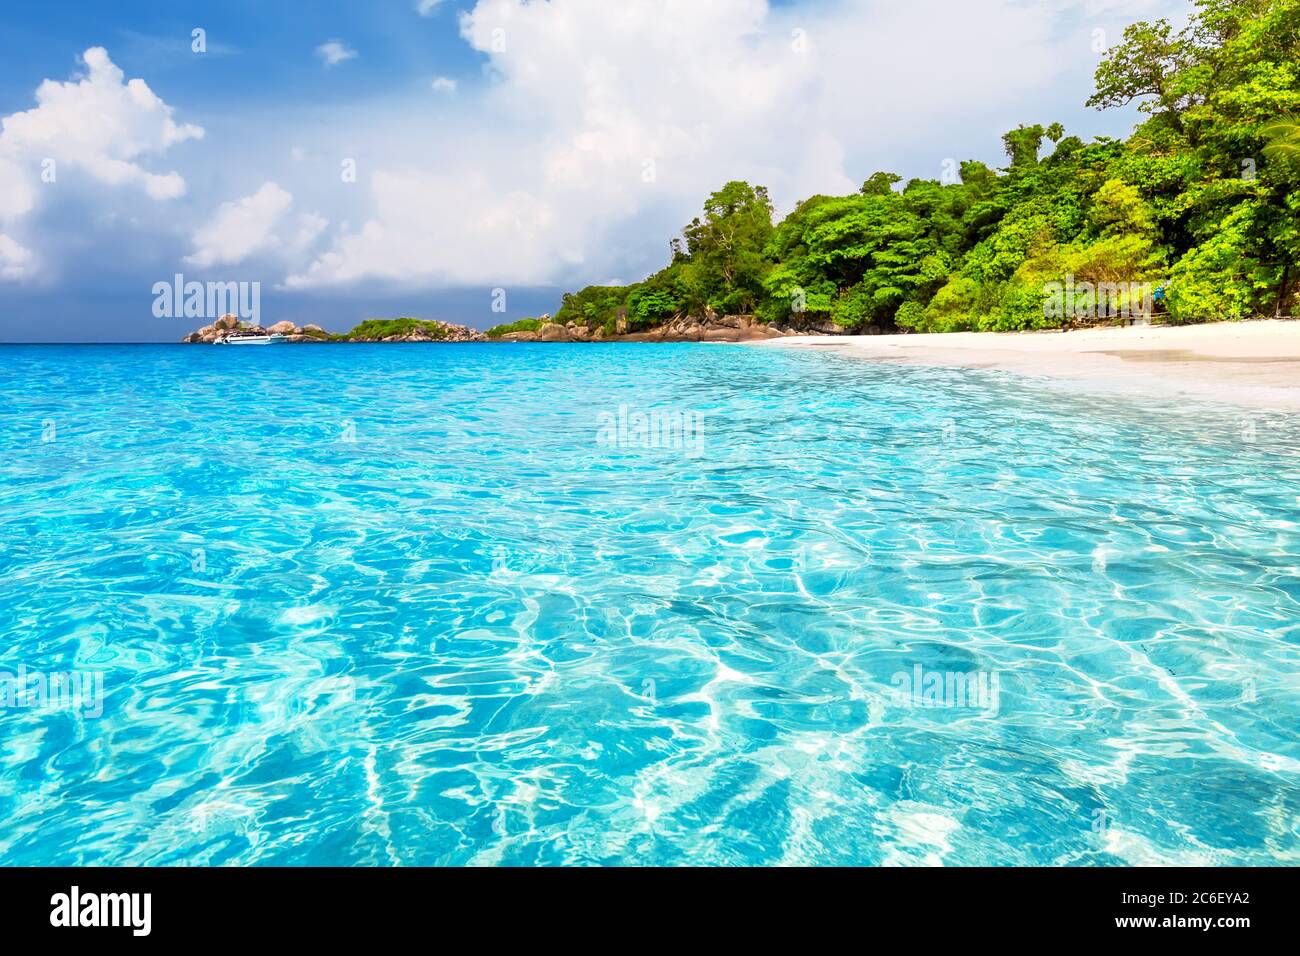 Beautiful beach and blue sky in Similan islands, Thailand. Vacation holidays background wallpaper. View of nice tropical beach.Travel summer holiday b Stock Photo